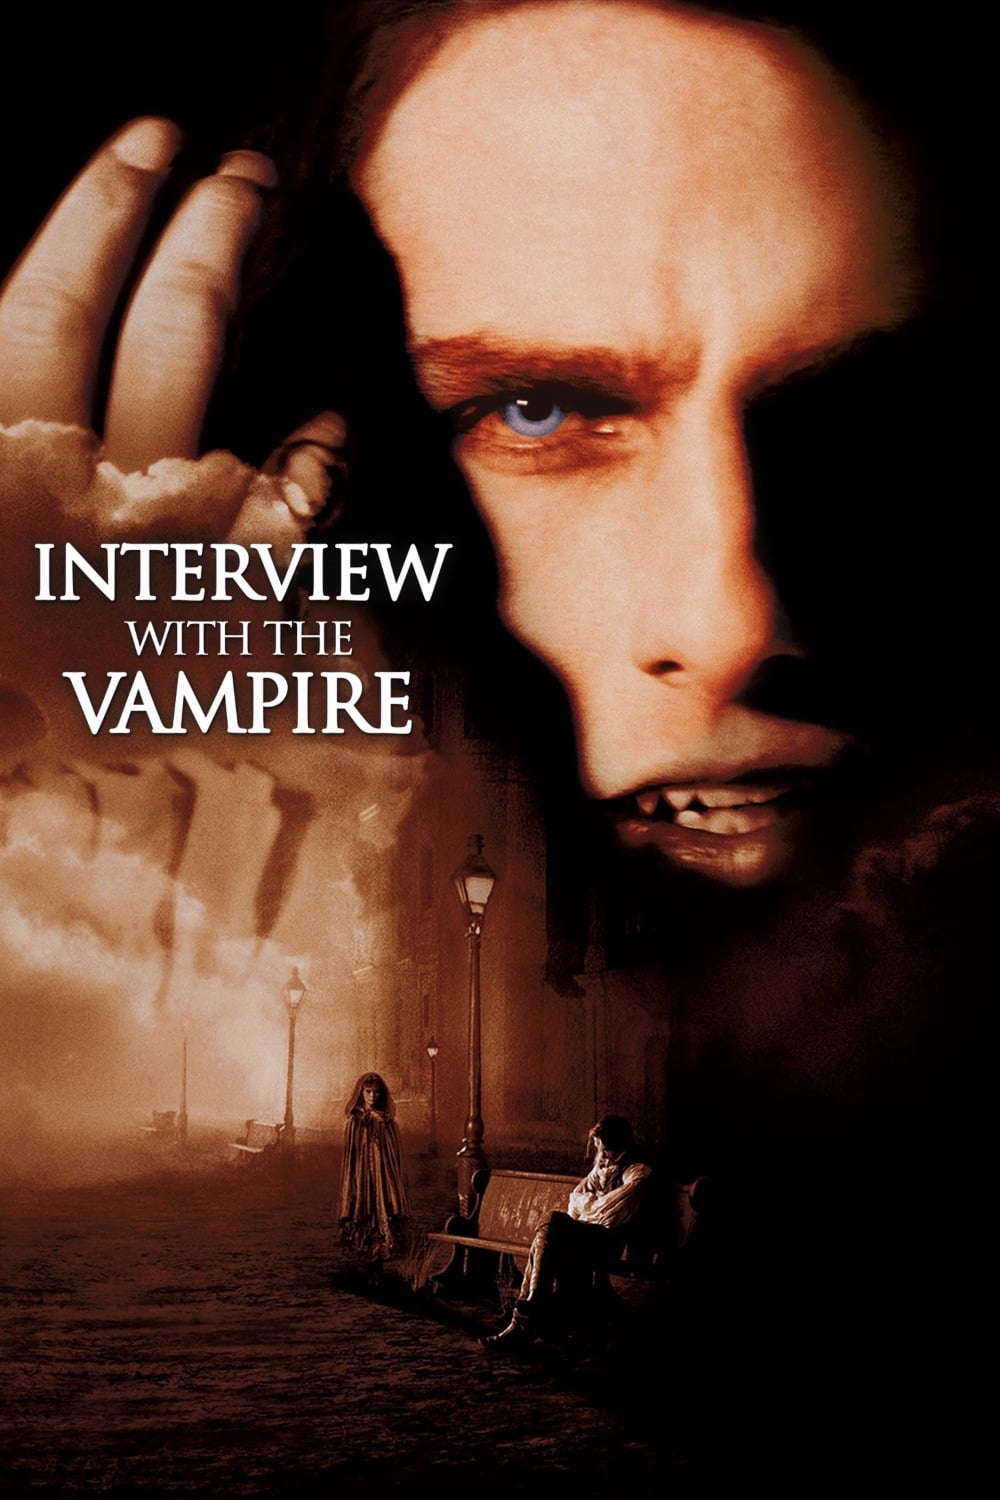 Phỏng Vấn Ma Cà Rồng - Interview with the Vampire